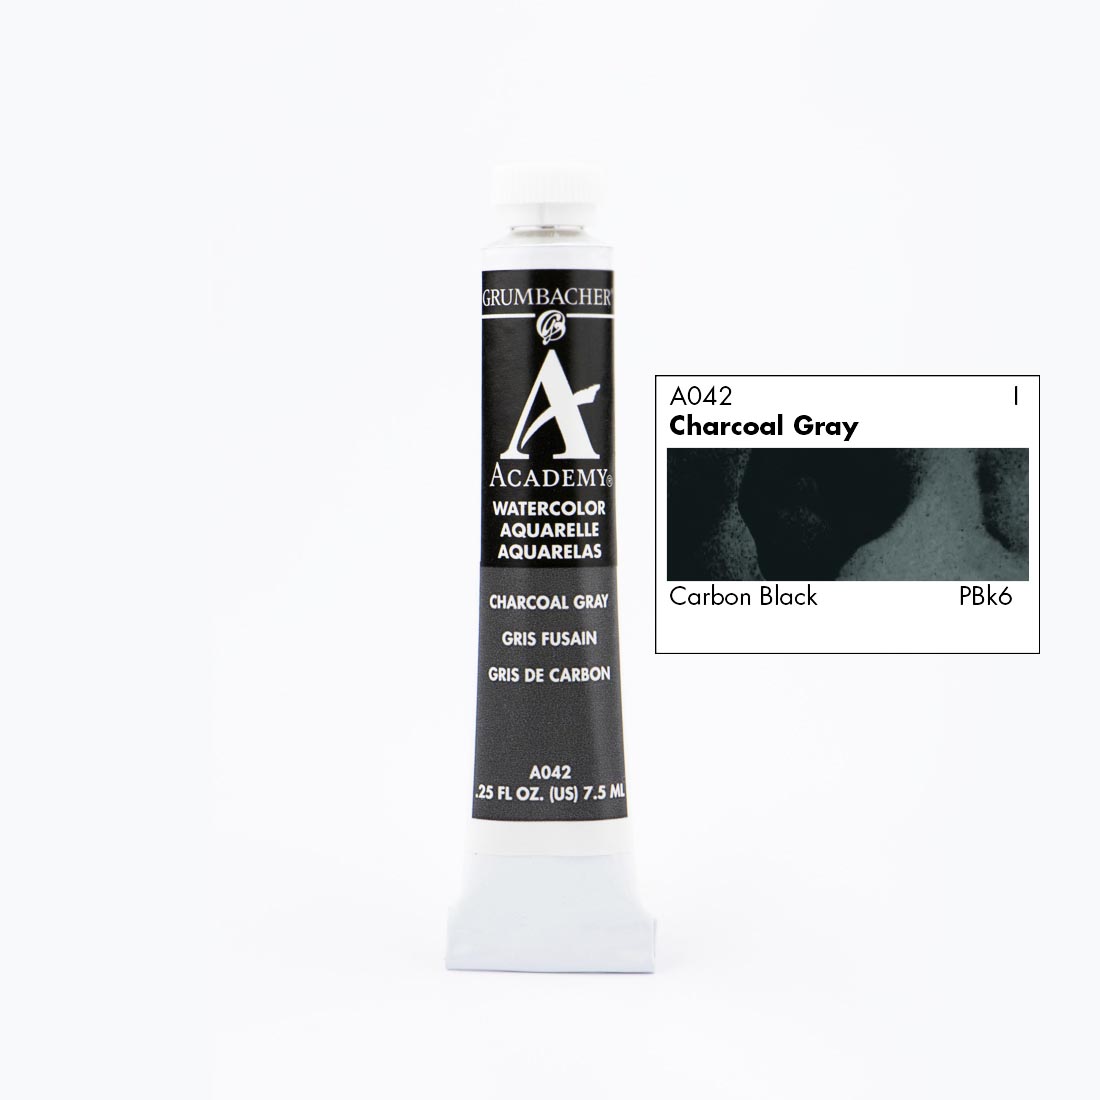 Tube of Grumbacher Academy Watercolor beside Charcoal Gray color swatch